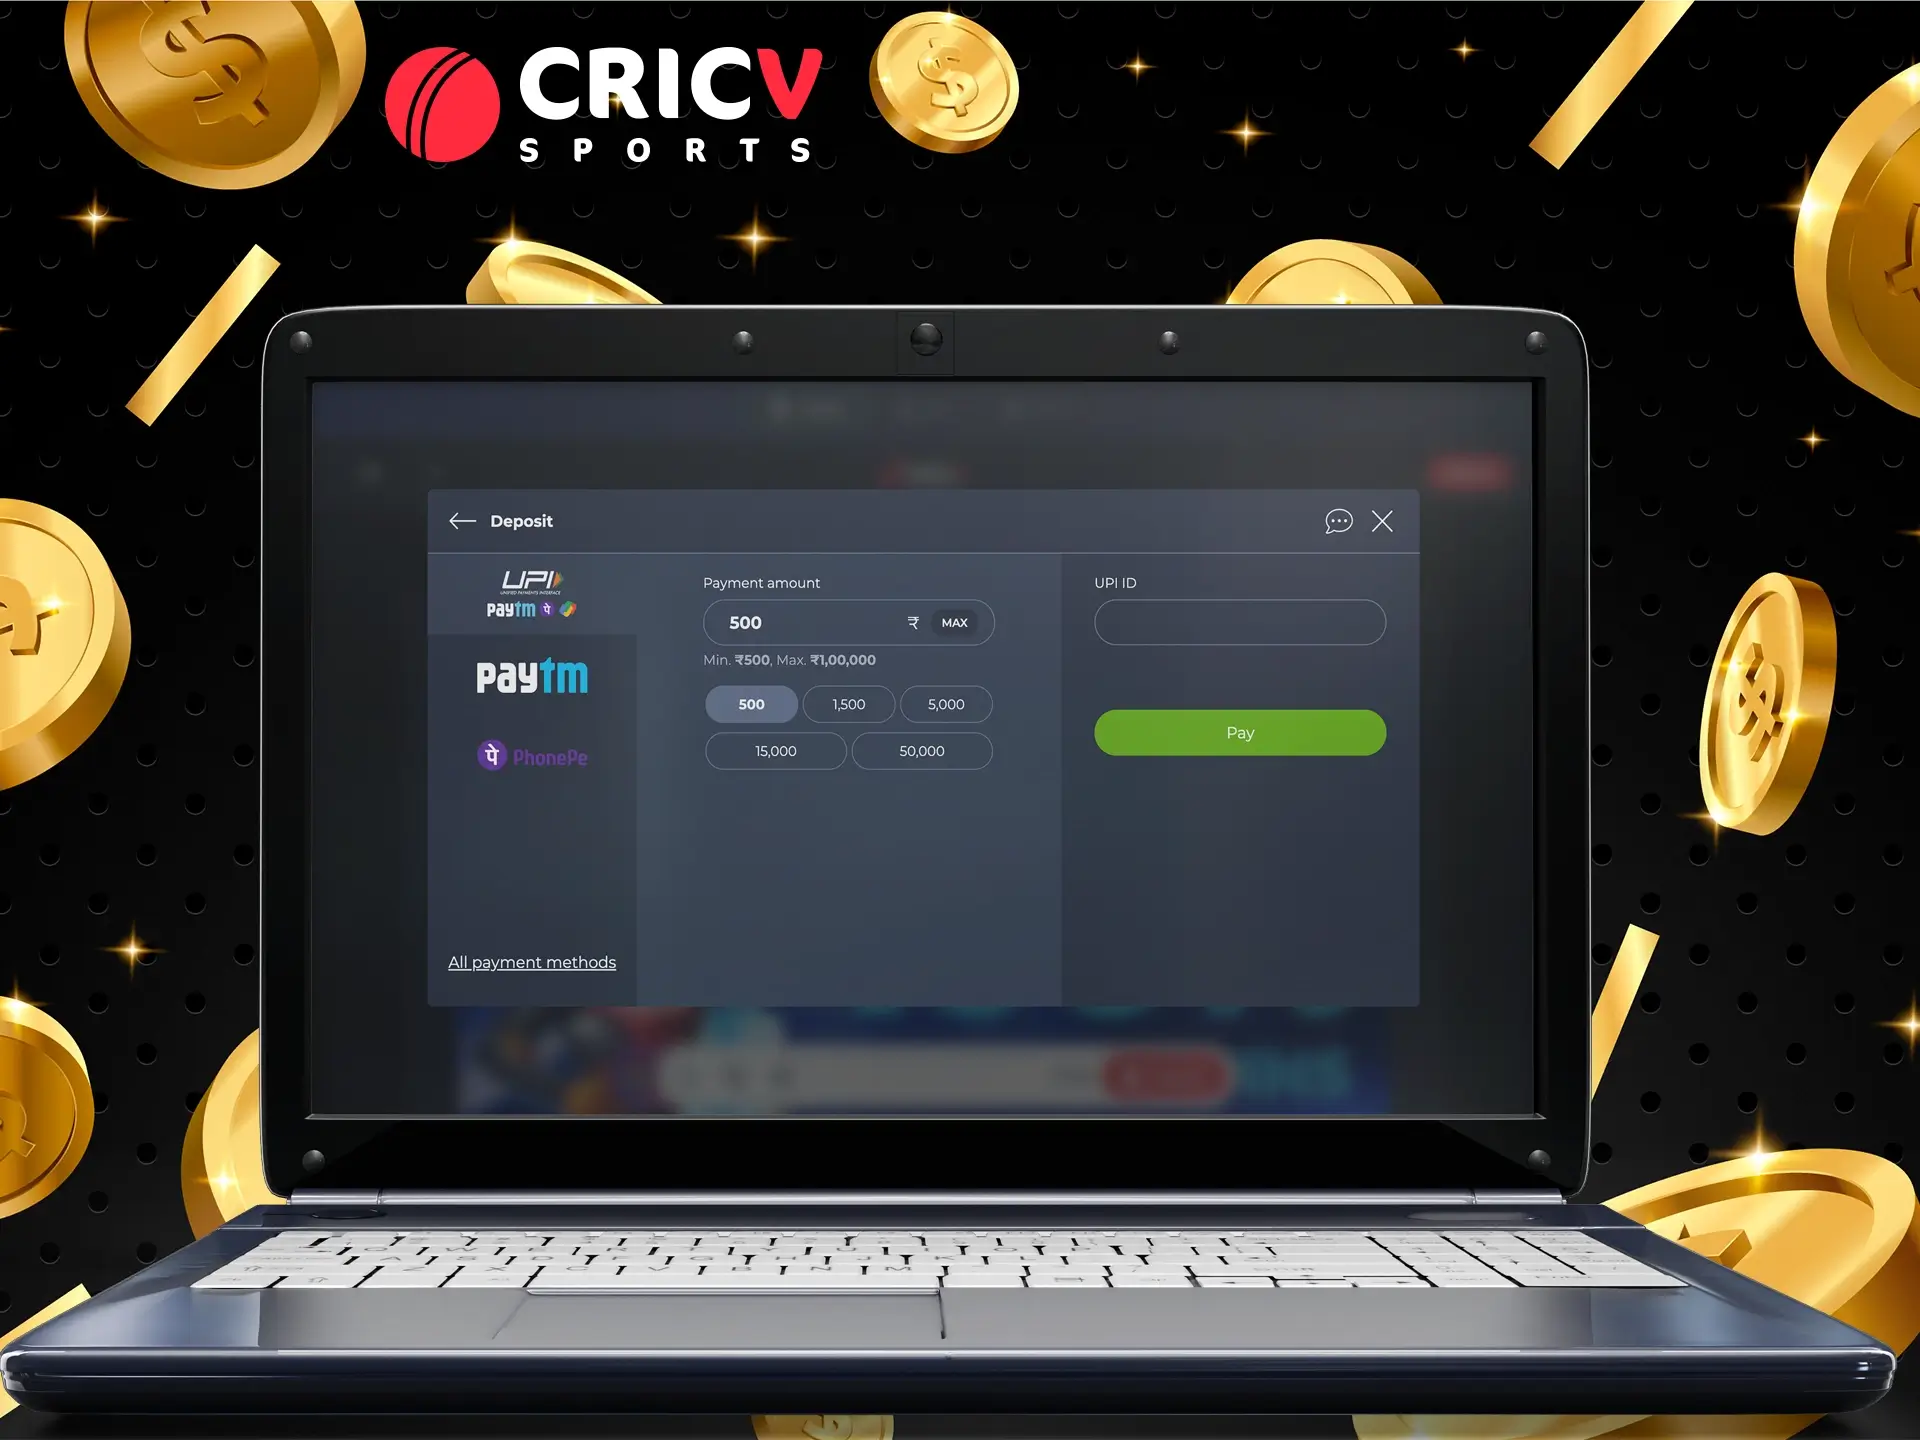 Users from India choose Cricv for fast and convenient payouts in the right currency.